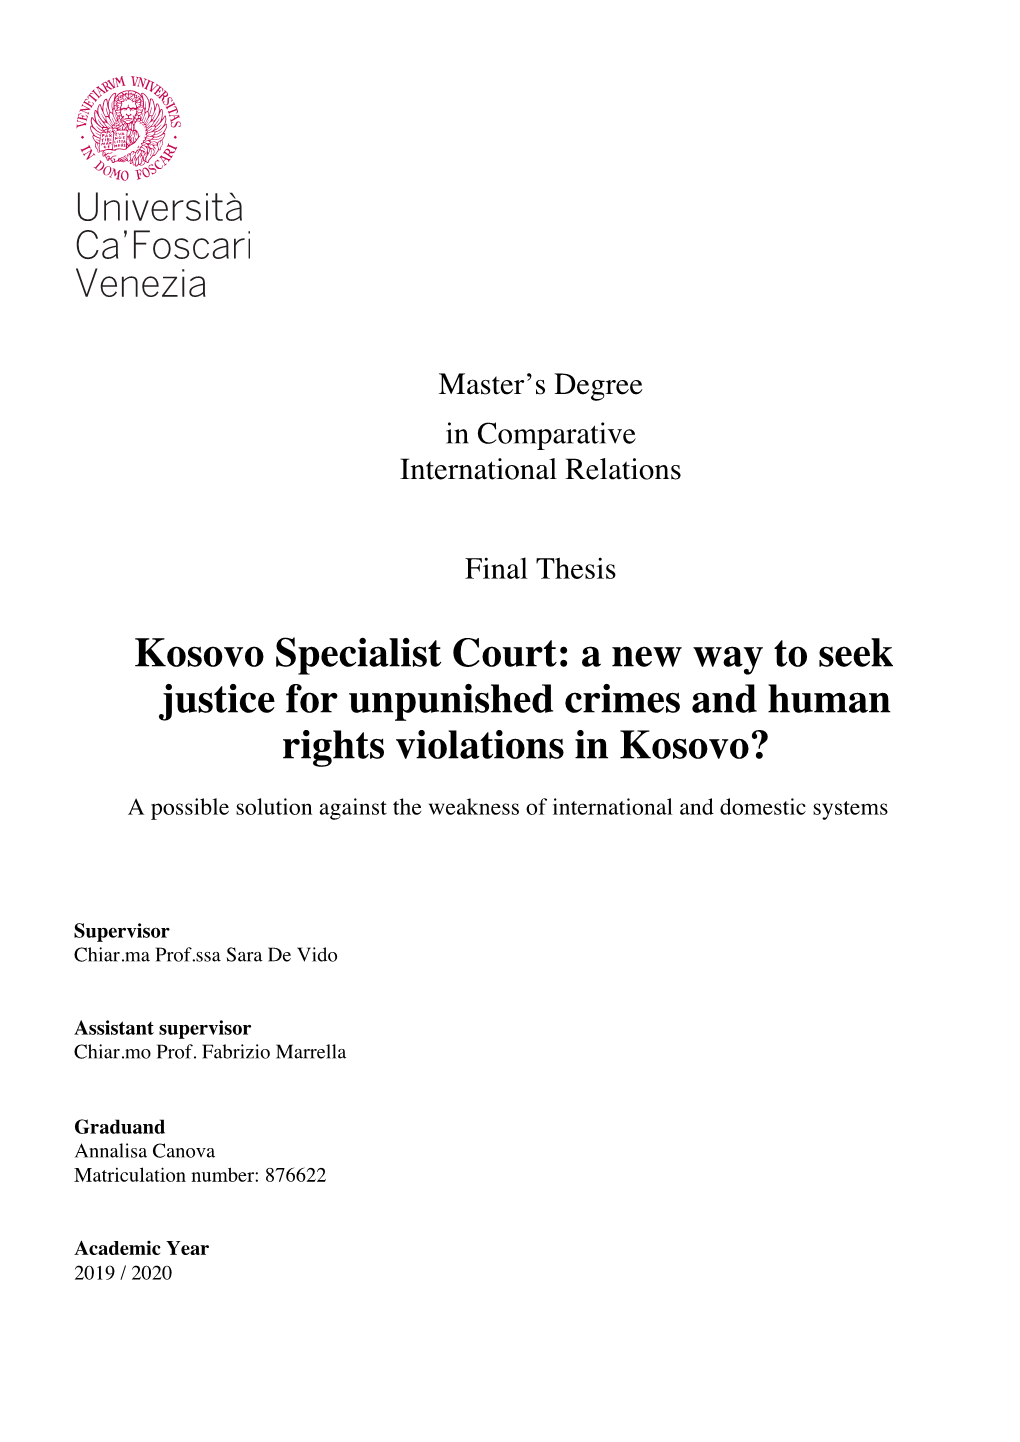 Kosovo Specialist Court: a New Way to Seek Justice for Unpunished Crimes and Human Rights Violations in Kosovo?